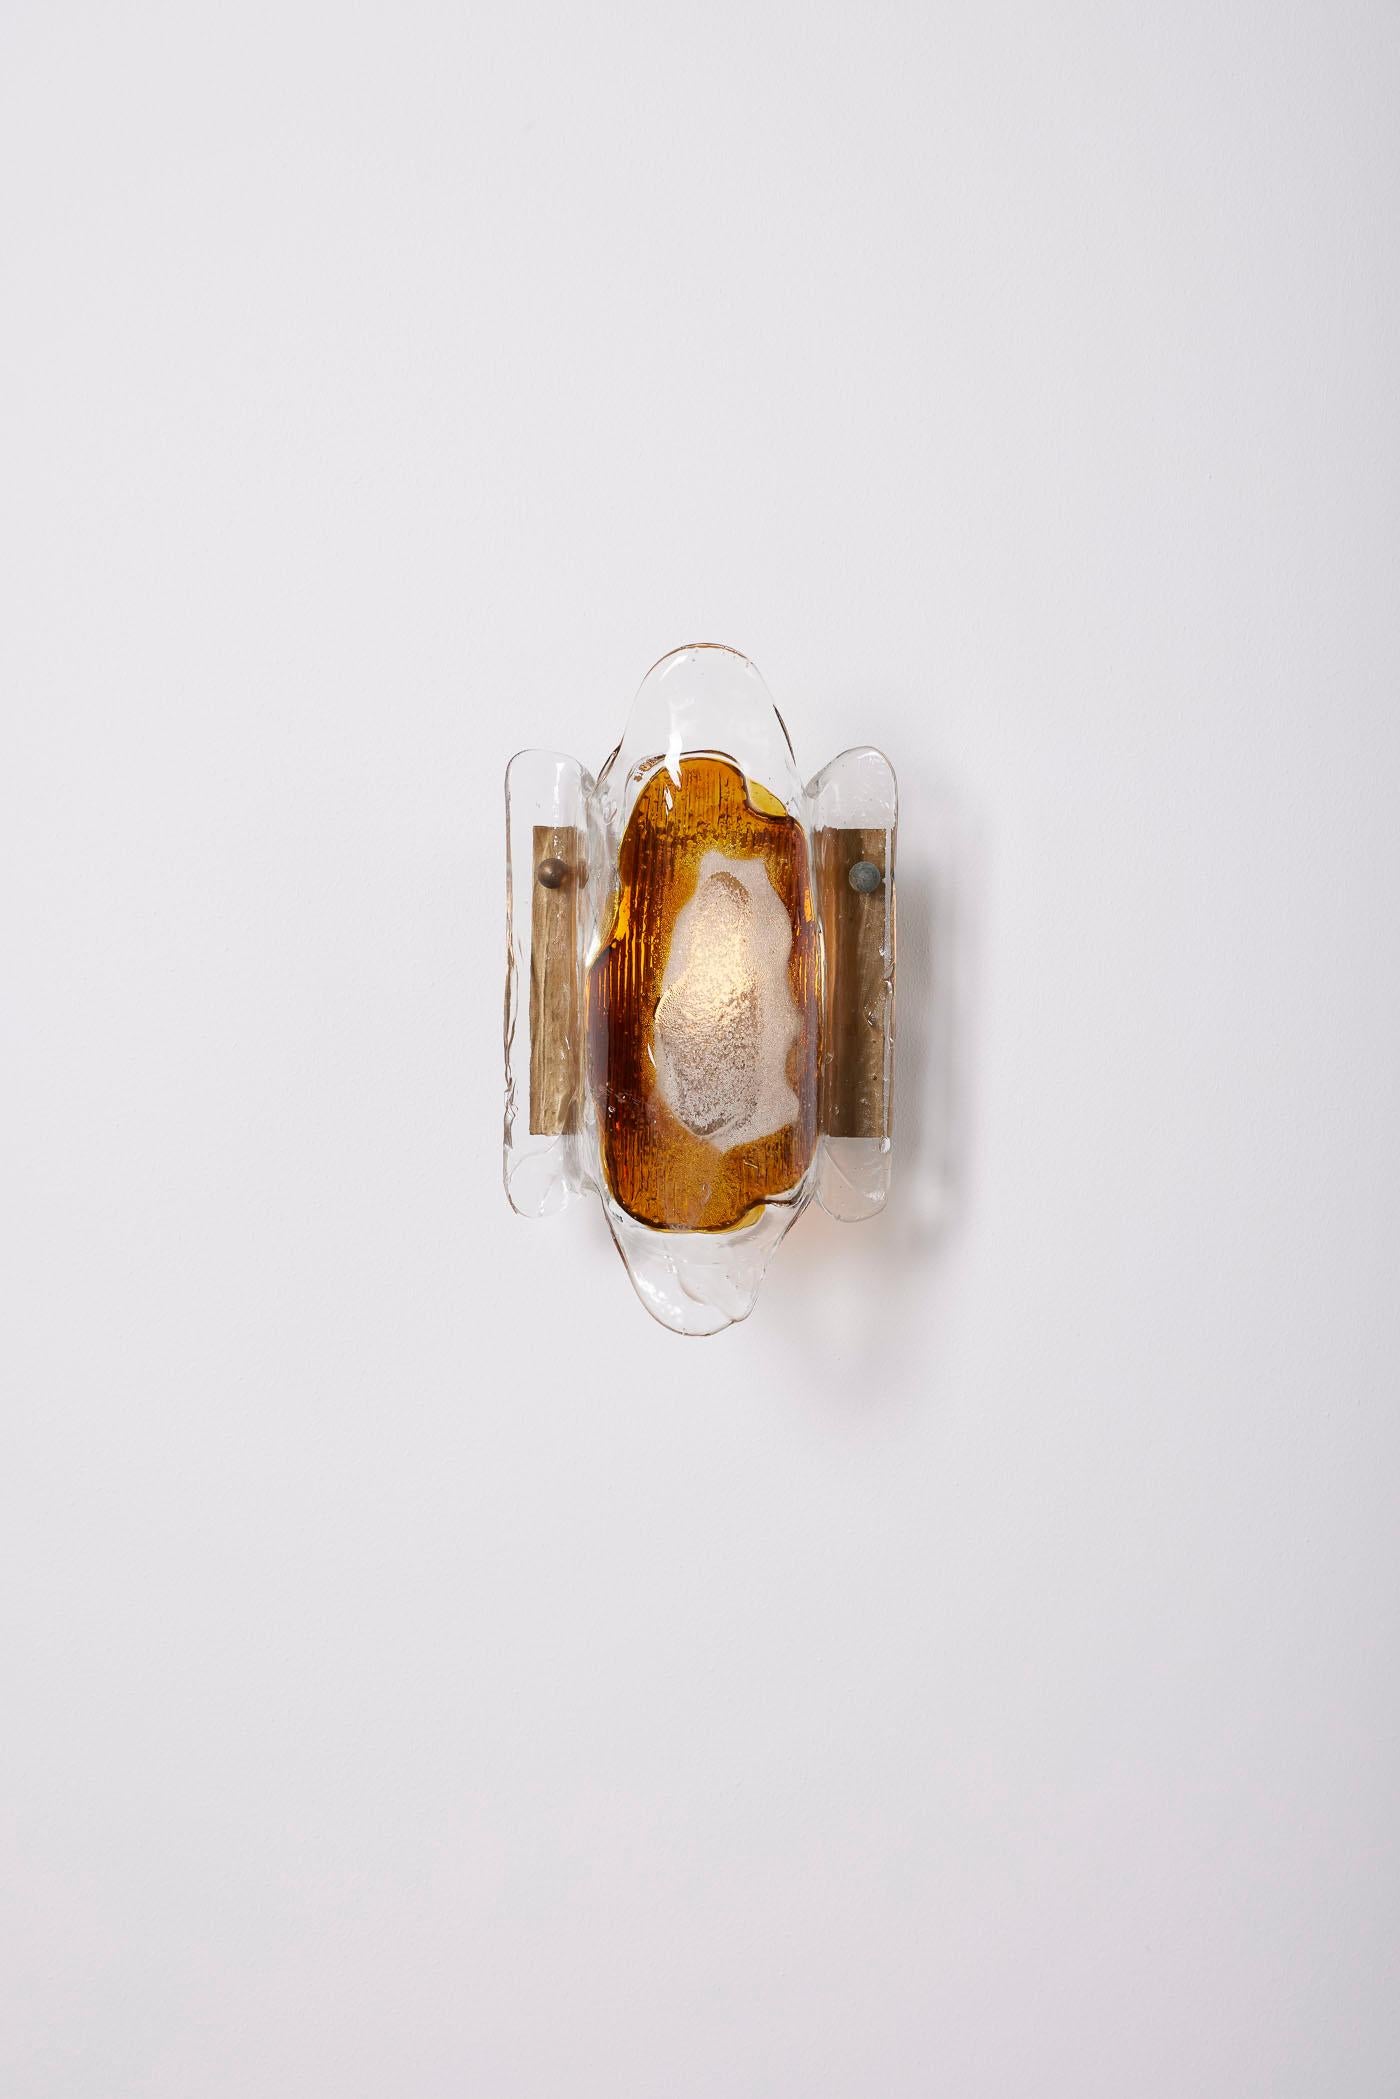 Wall sconce by Danish designer Svend Aage Holm Sørensen (1913-2004), from the 1950s. The diffuser is made of transparent glass with a geometric orange pattern in the center. The structure is in golden brass. Very good condition.

LP1991-2008